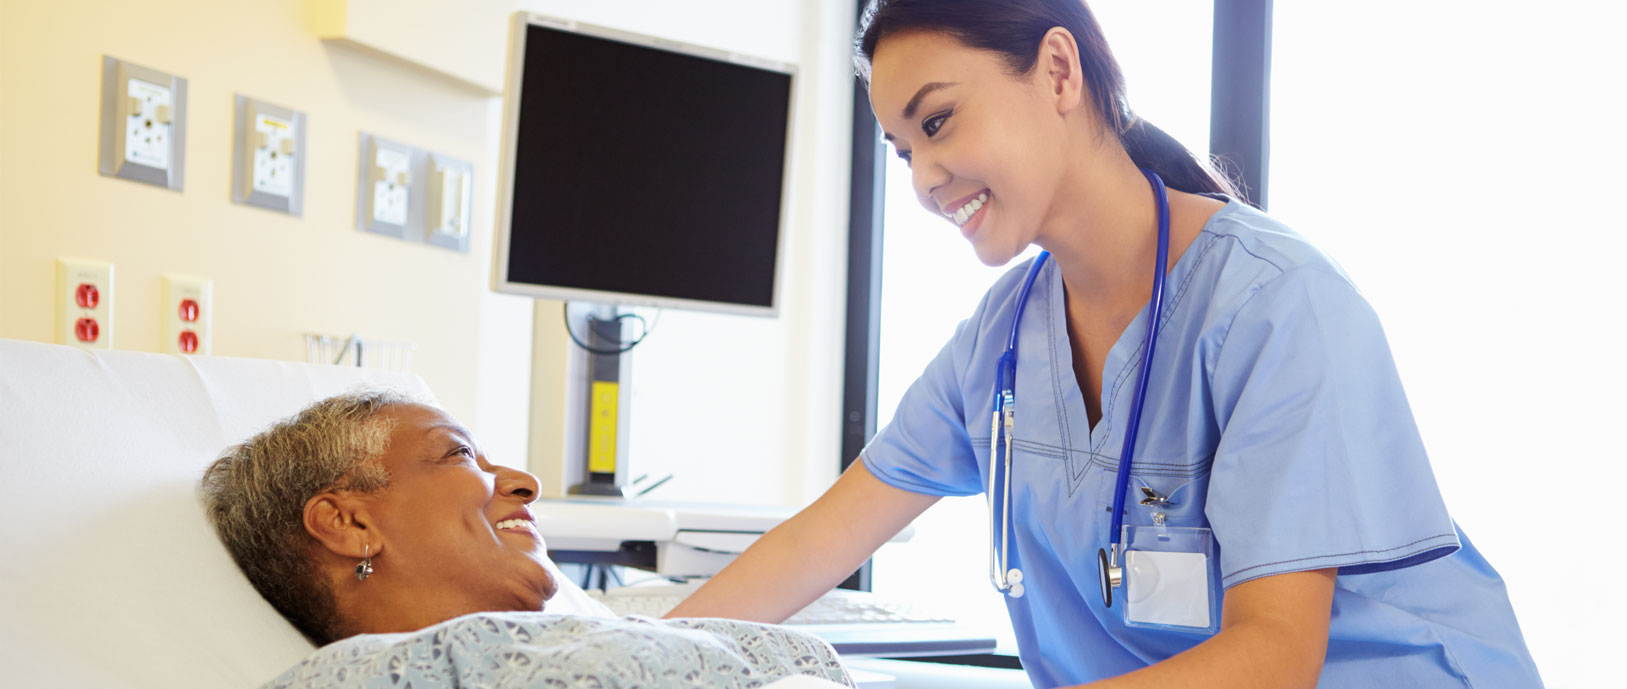 Banner picture of a smiling female Nurse standing over a smiling female patient laying in a hospital bed with a medical monitor in the background.